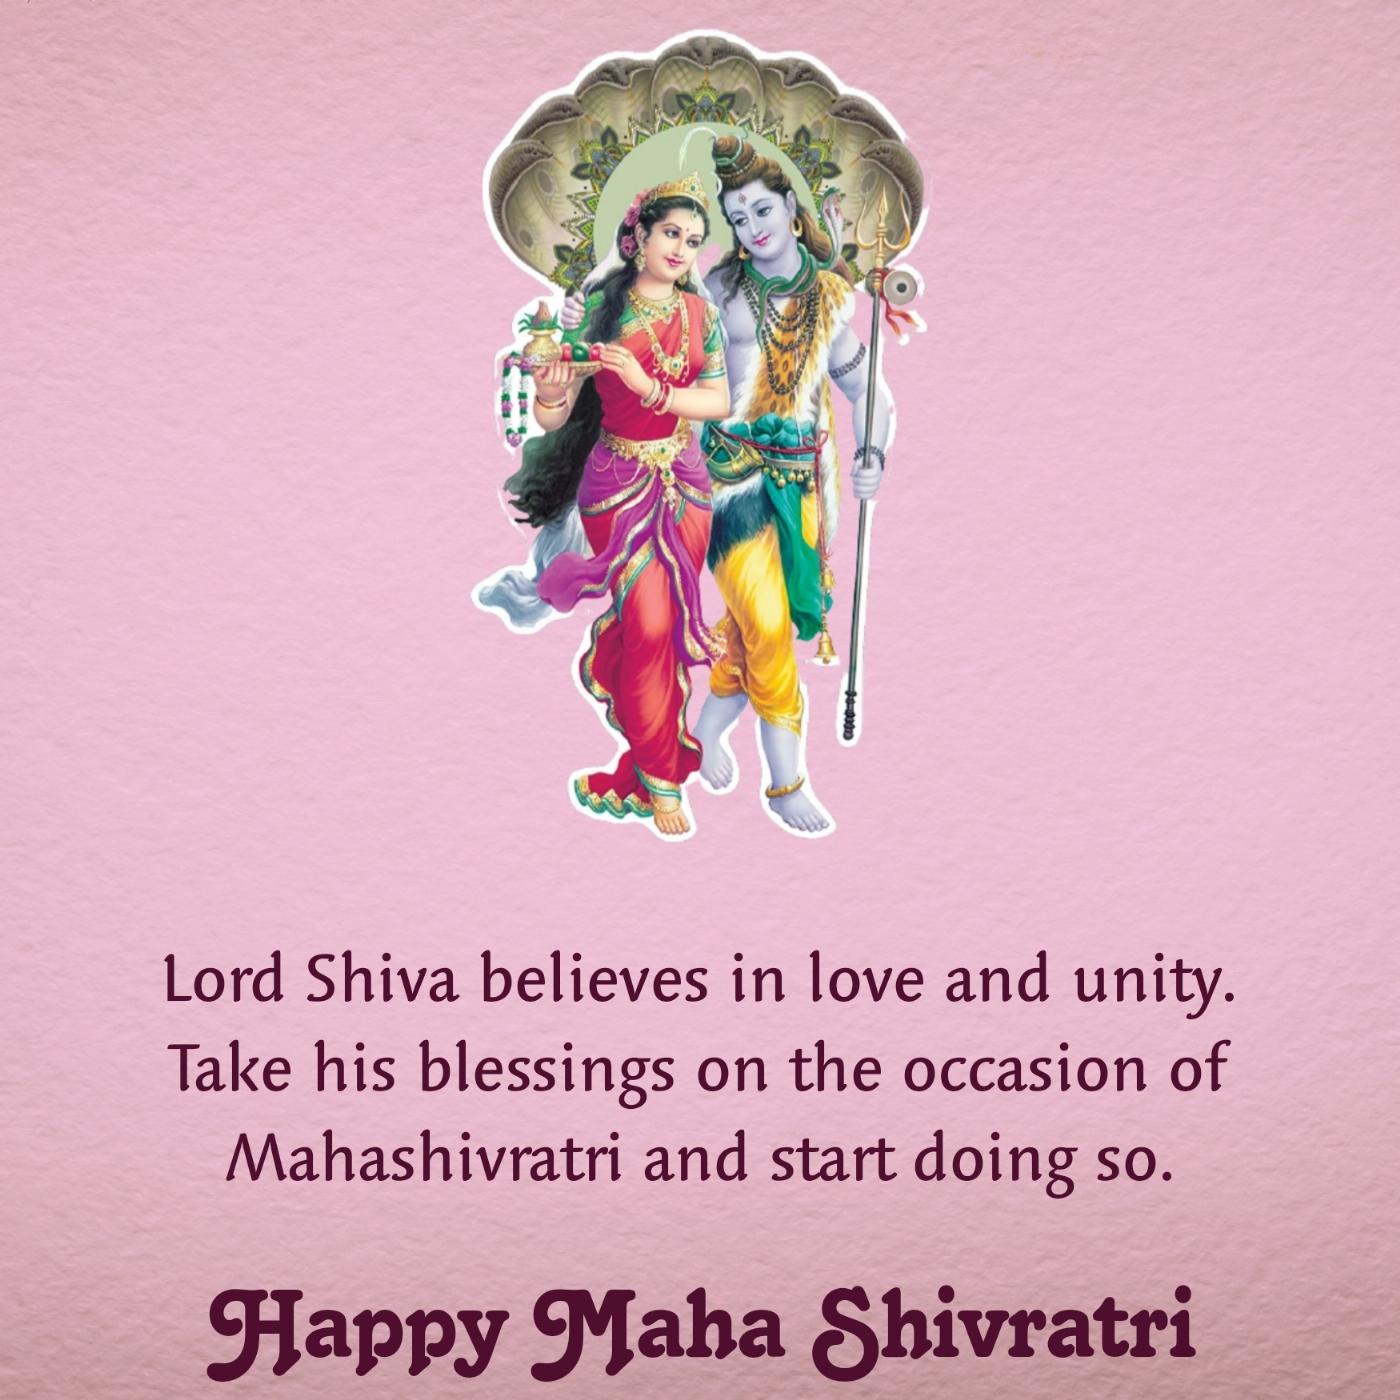 Lord Shiva believes in love and unity